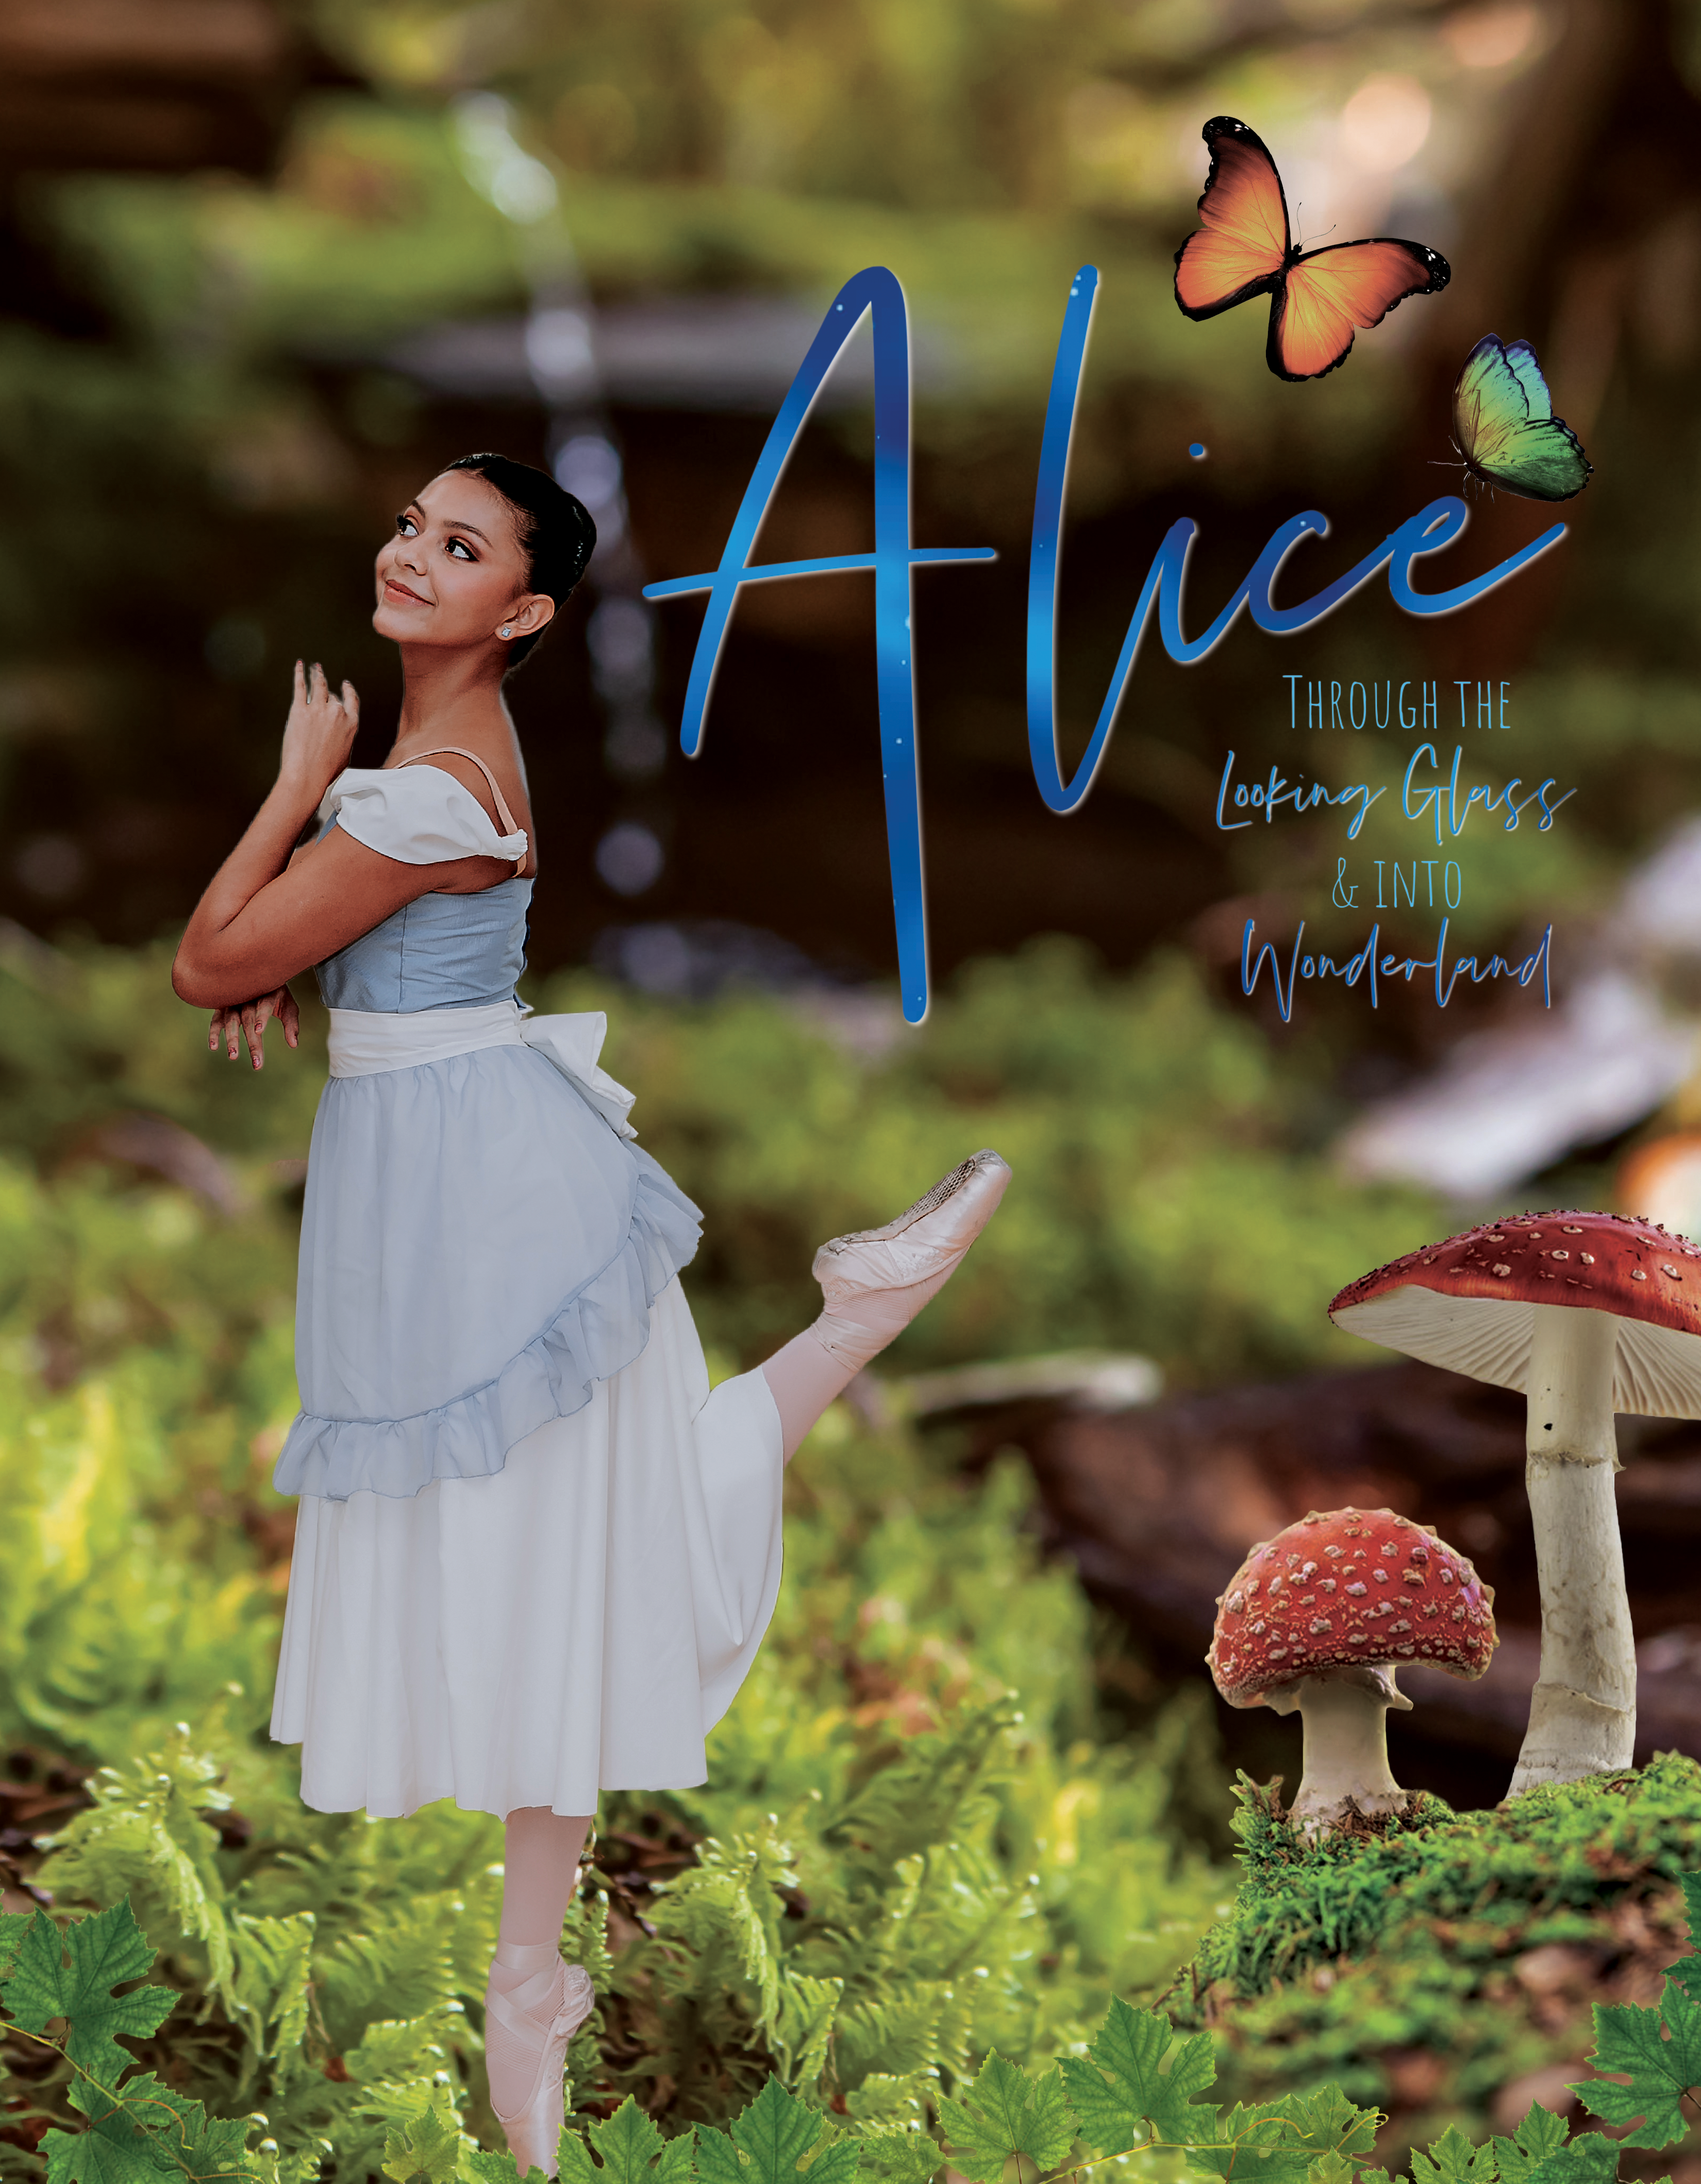 Alice - Through the Looking Glass (1)